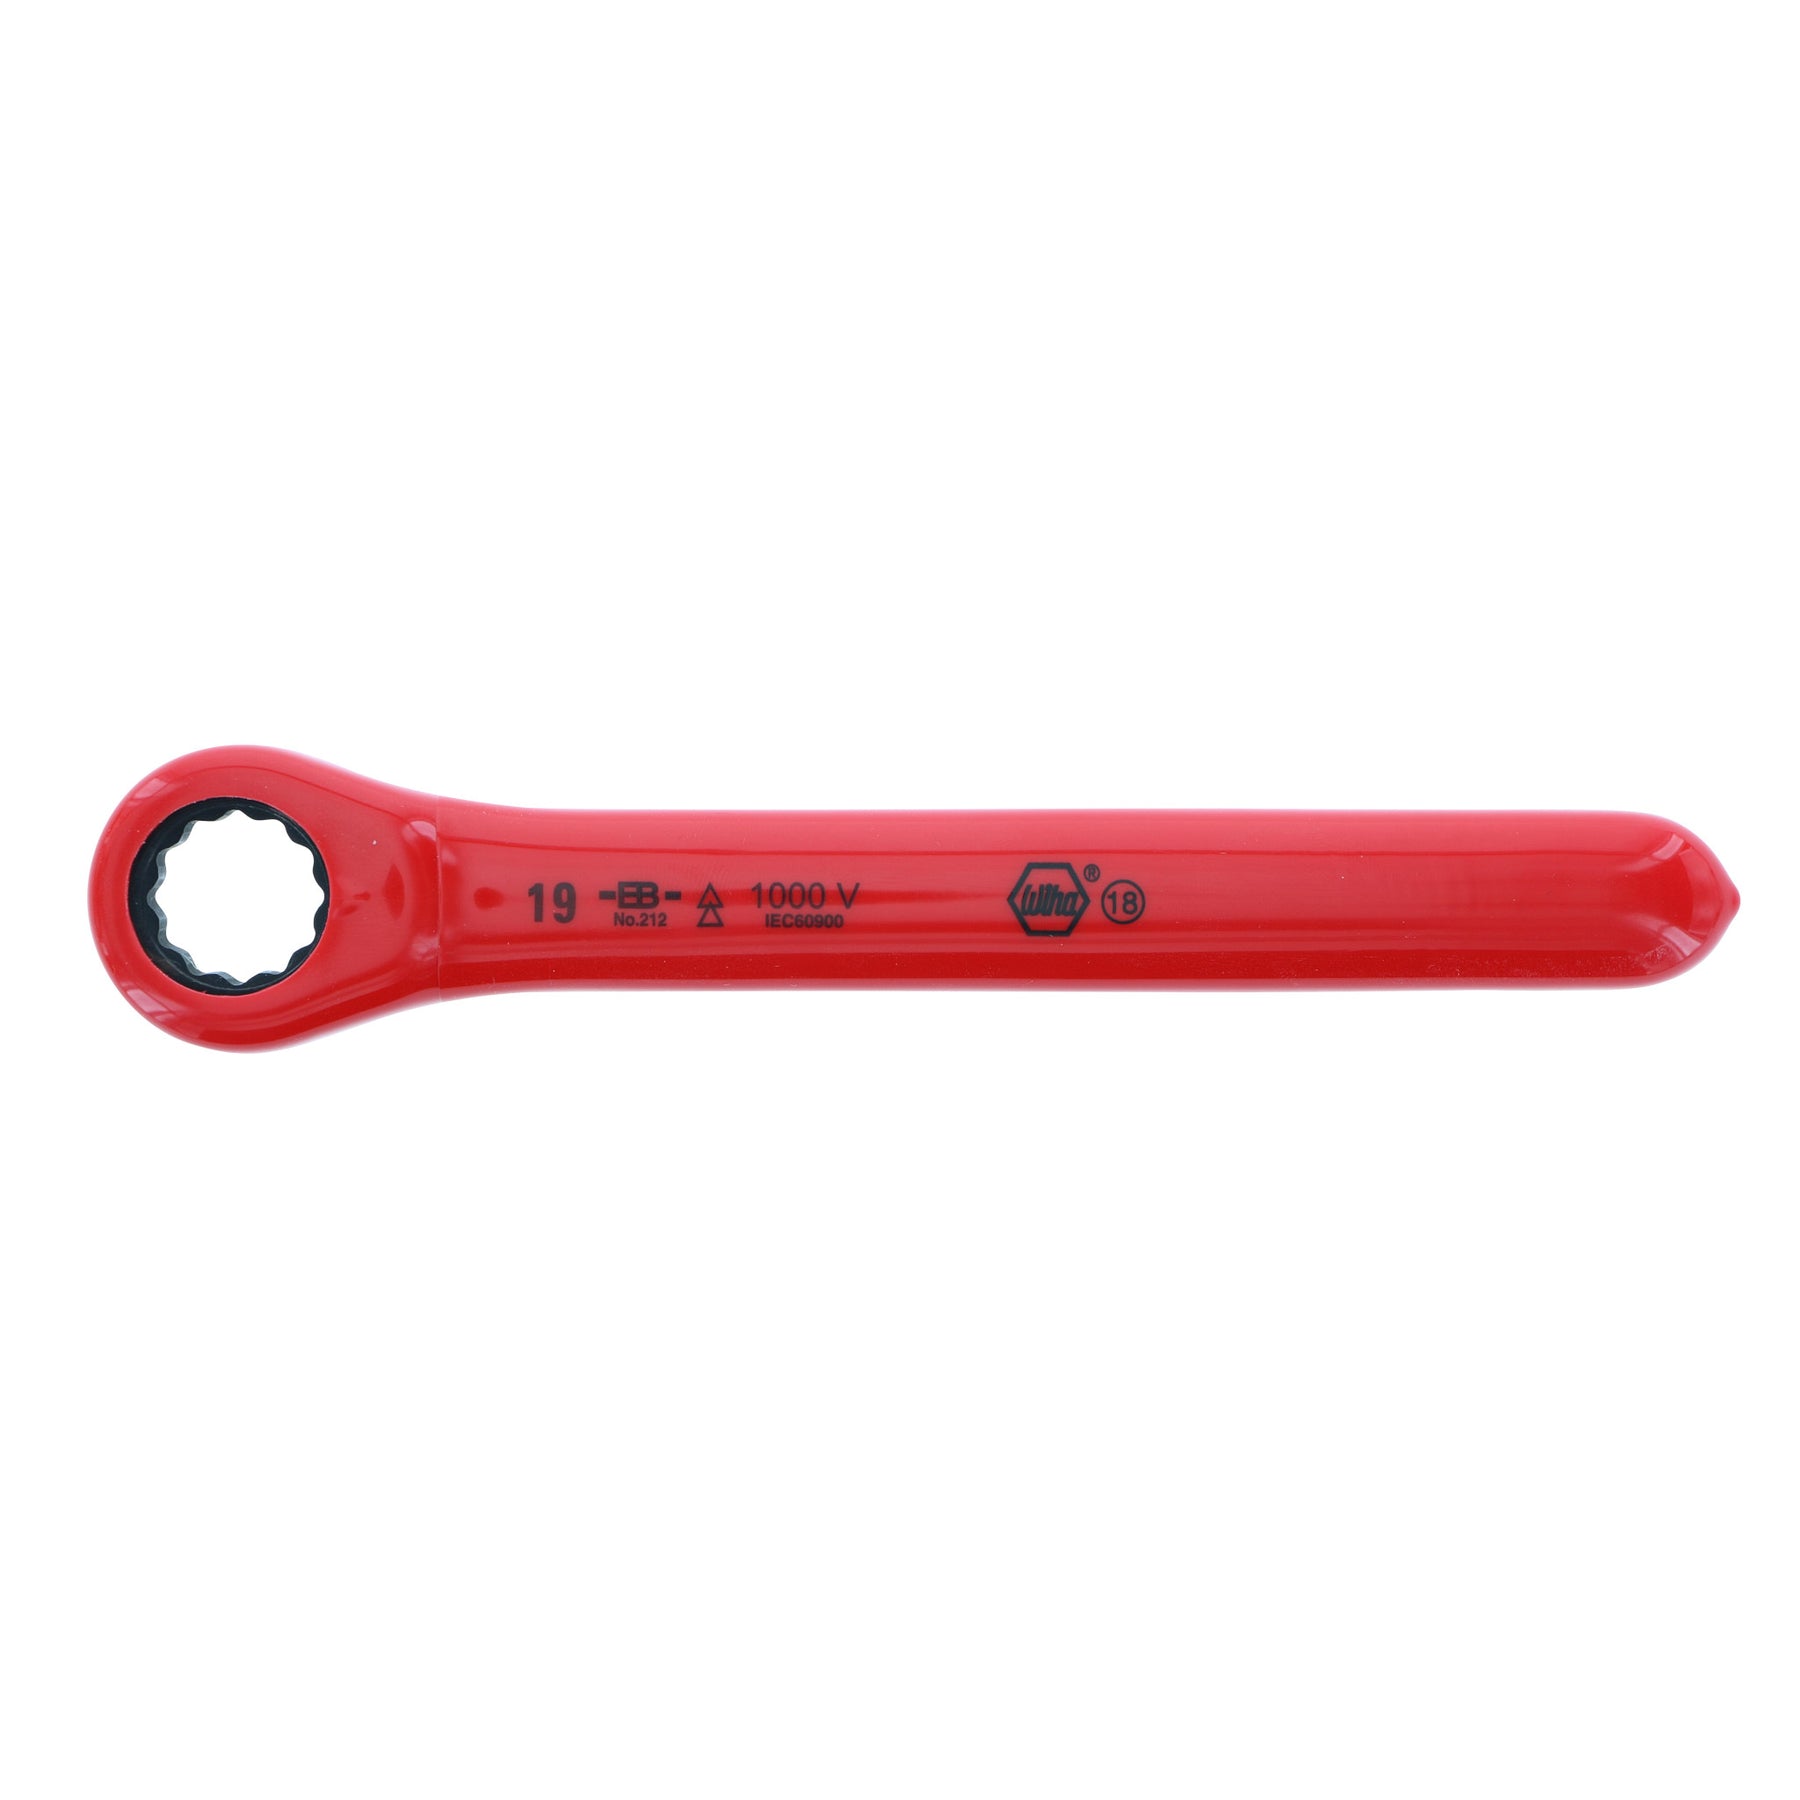 Insulated Ratchet Wrench 19mm